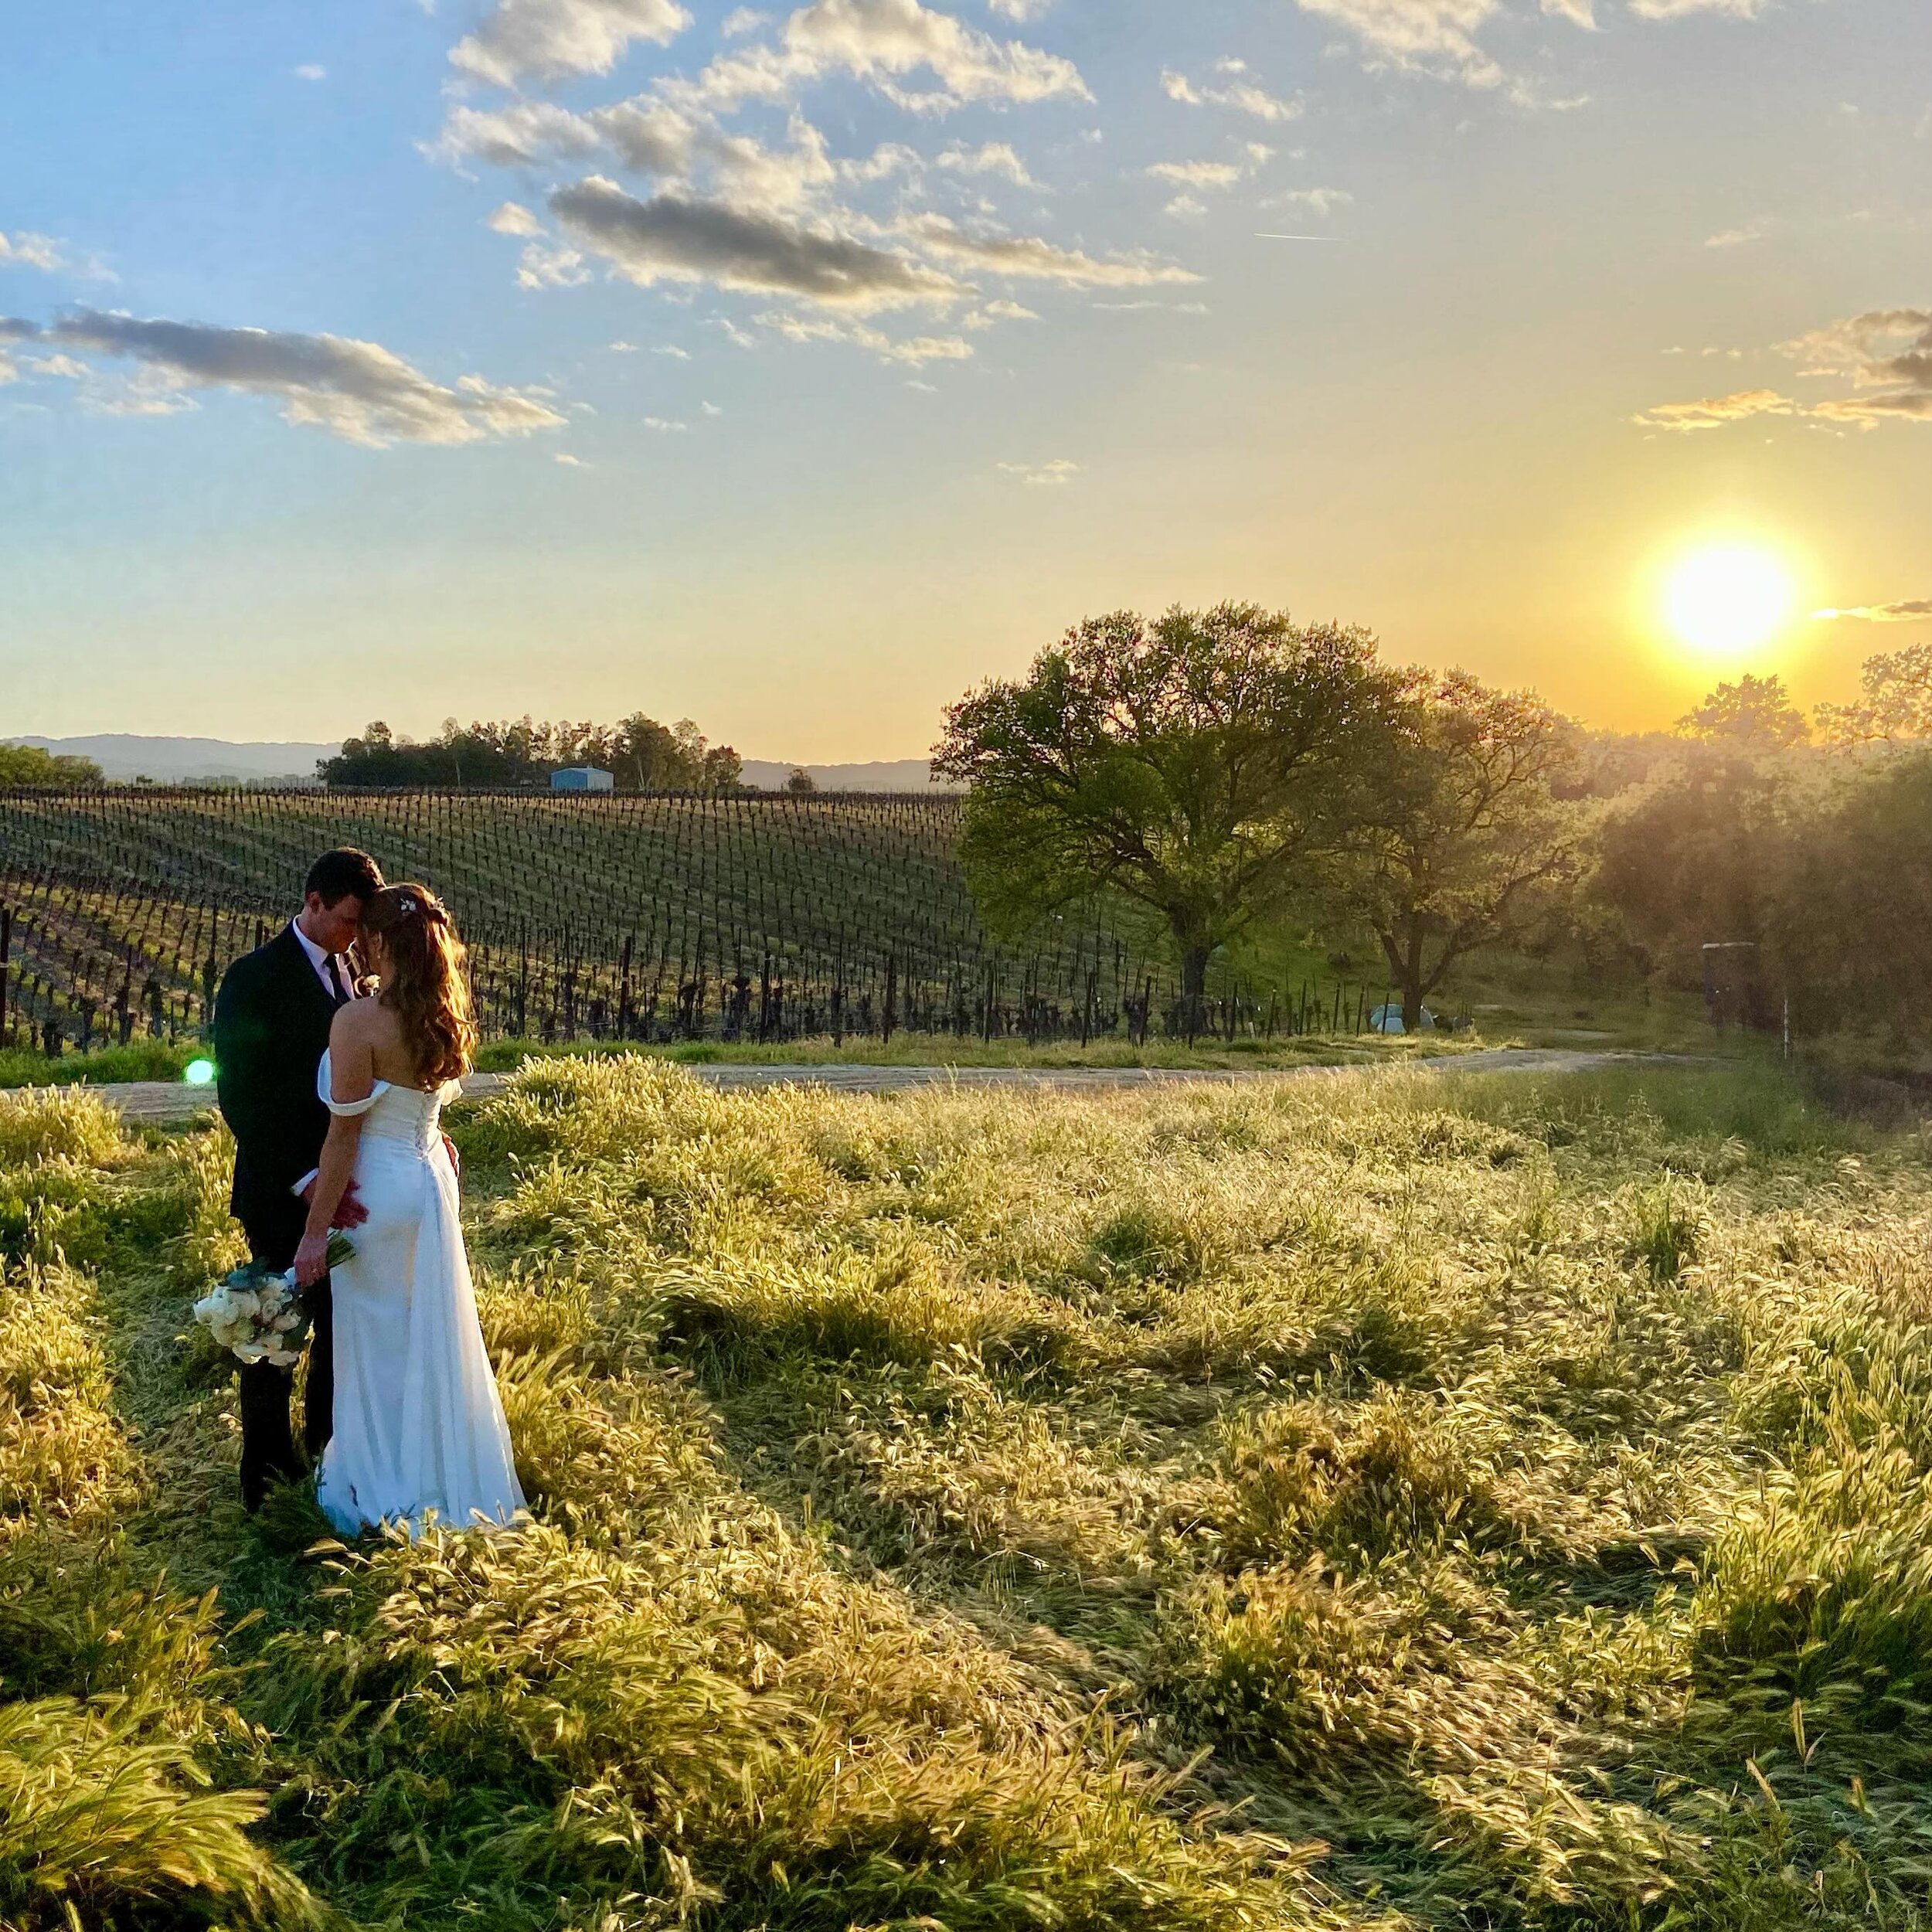 Such a wonderful first wedding of the season 🤍 With lots of rain &amp; wind &amp; even hail coming down on Friday, nothing could phase Tate + Jenna! But this gorgeous sunshine was warmly welcomed on Saturday evening ;) Congrats to the newlyweds - we